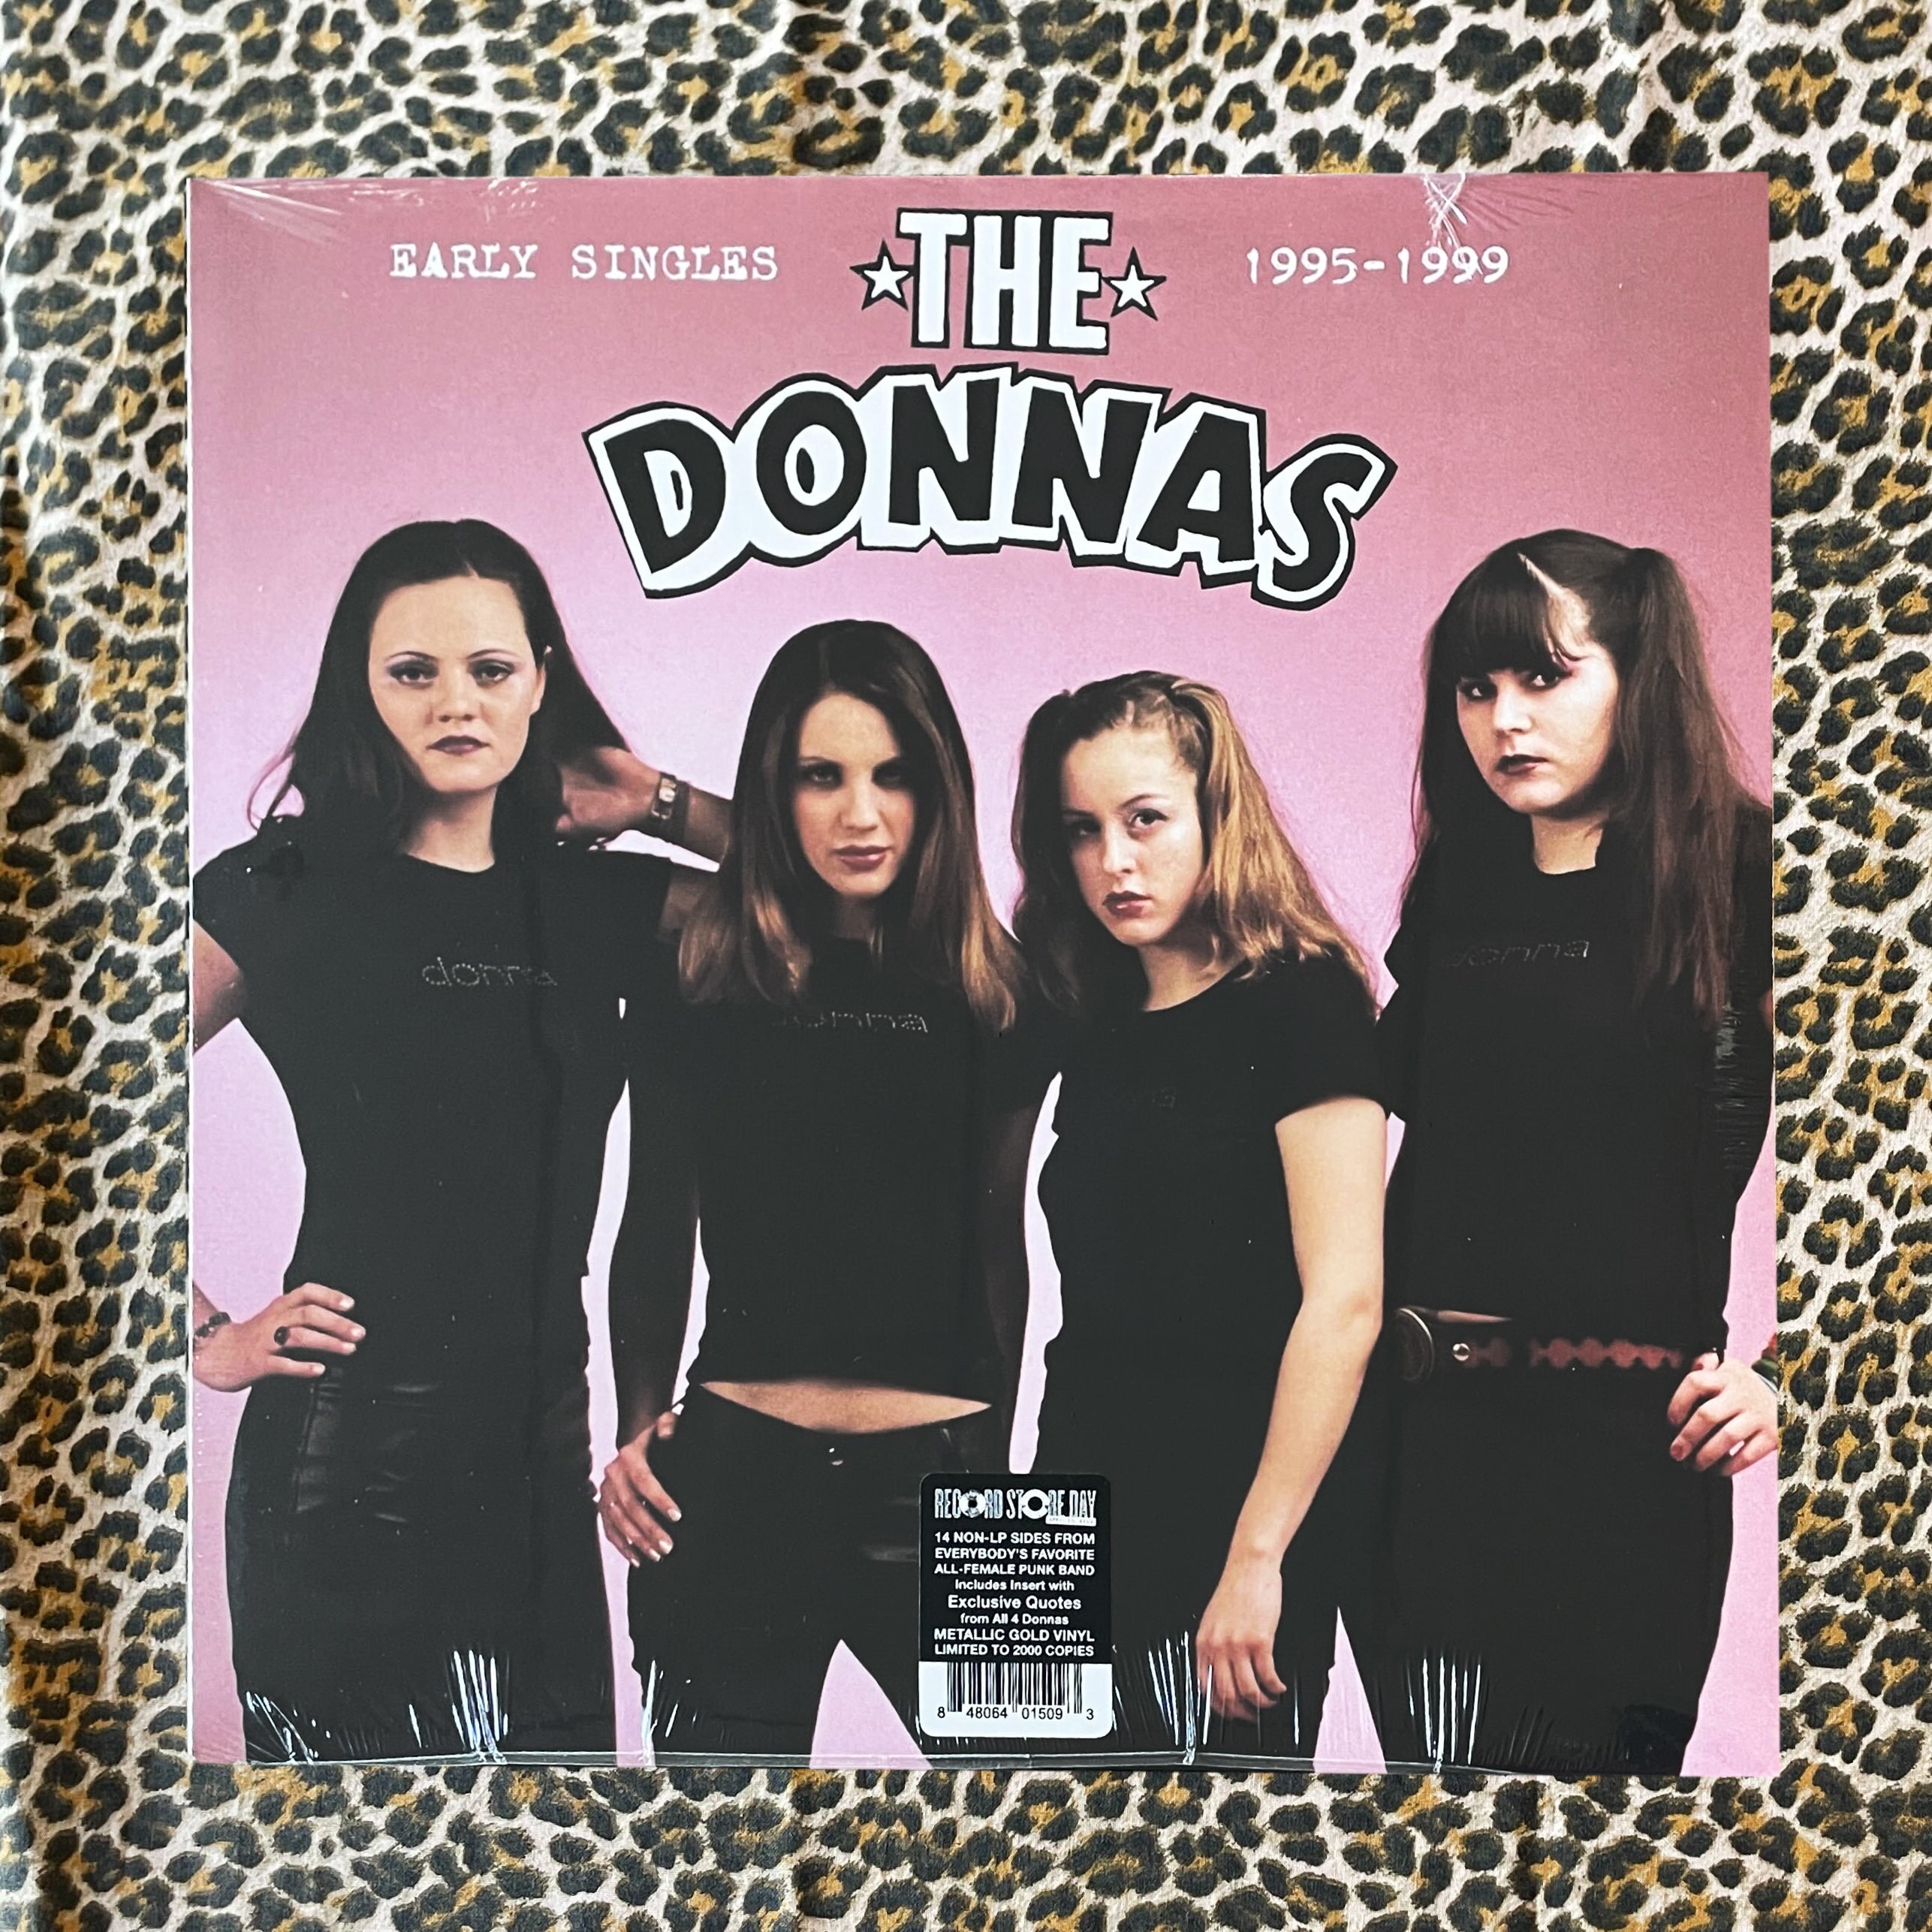 The Donnas: Early Singles 1995-1999 12